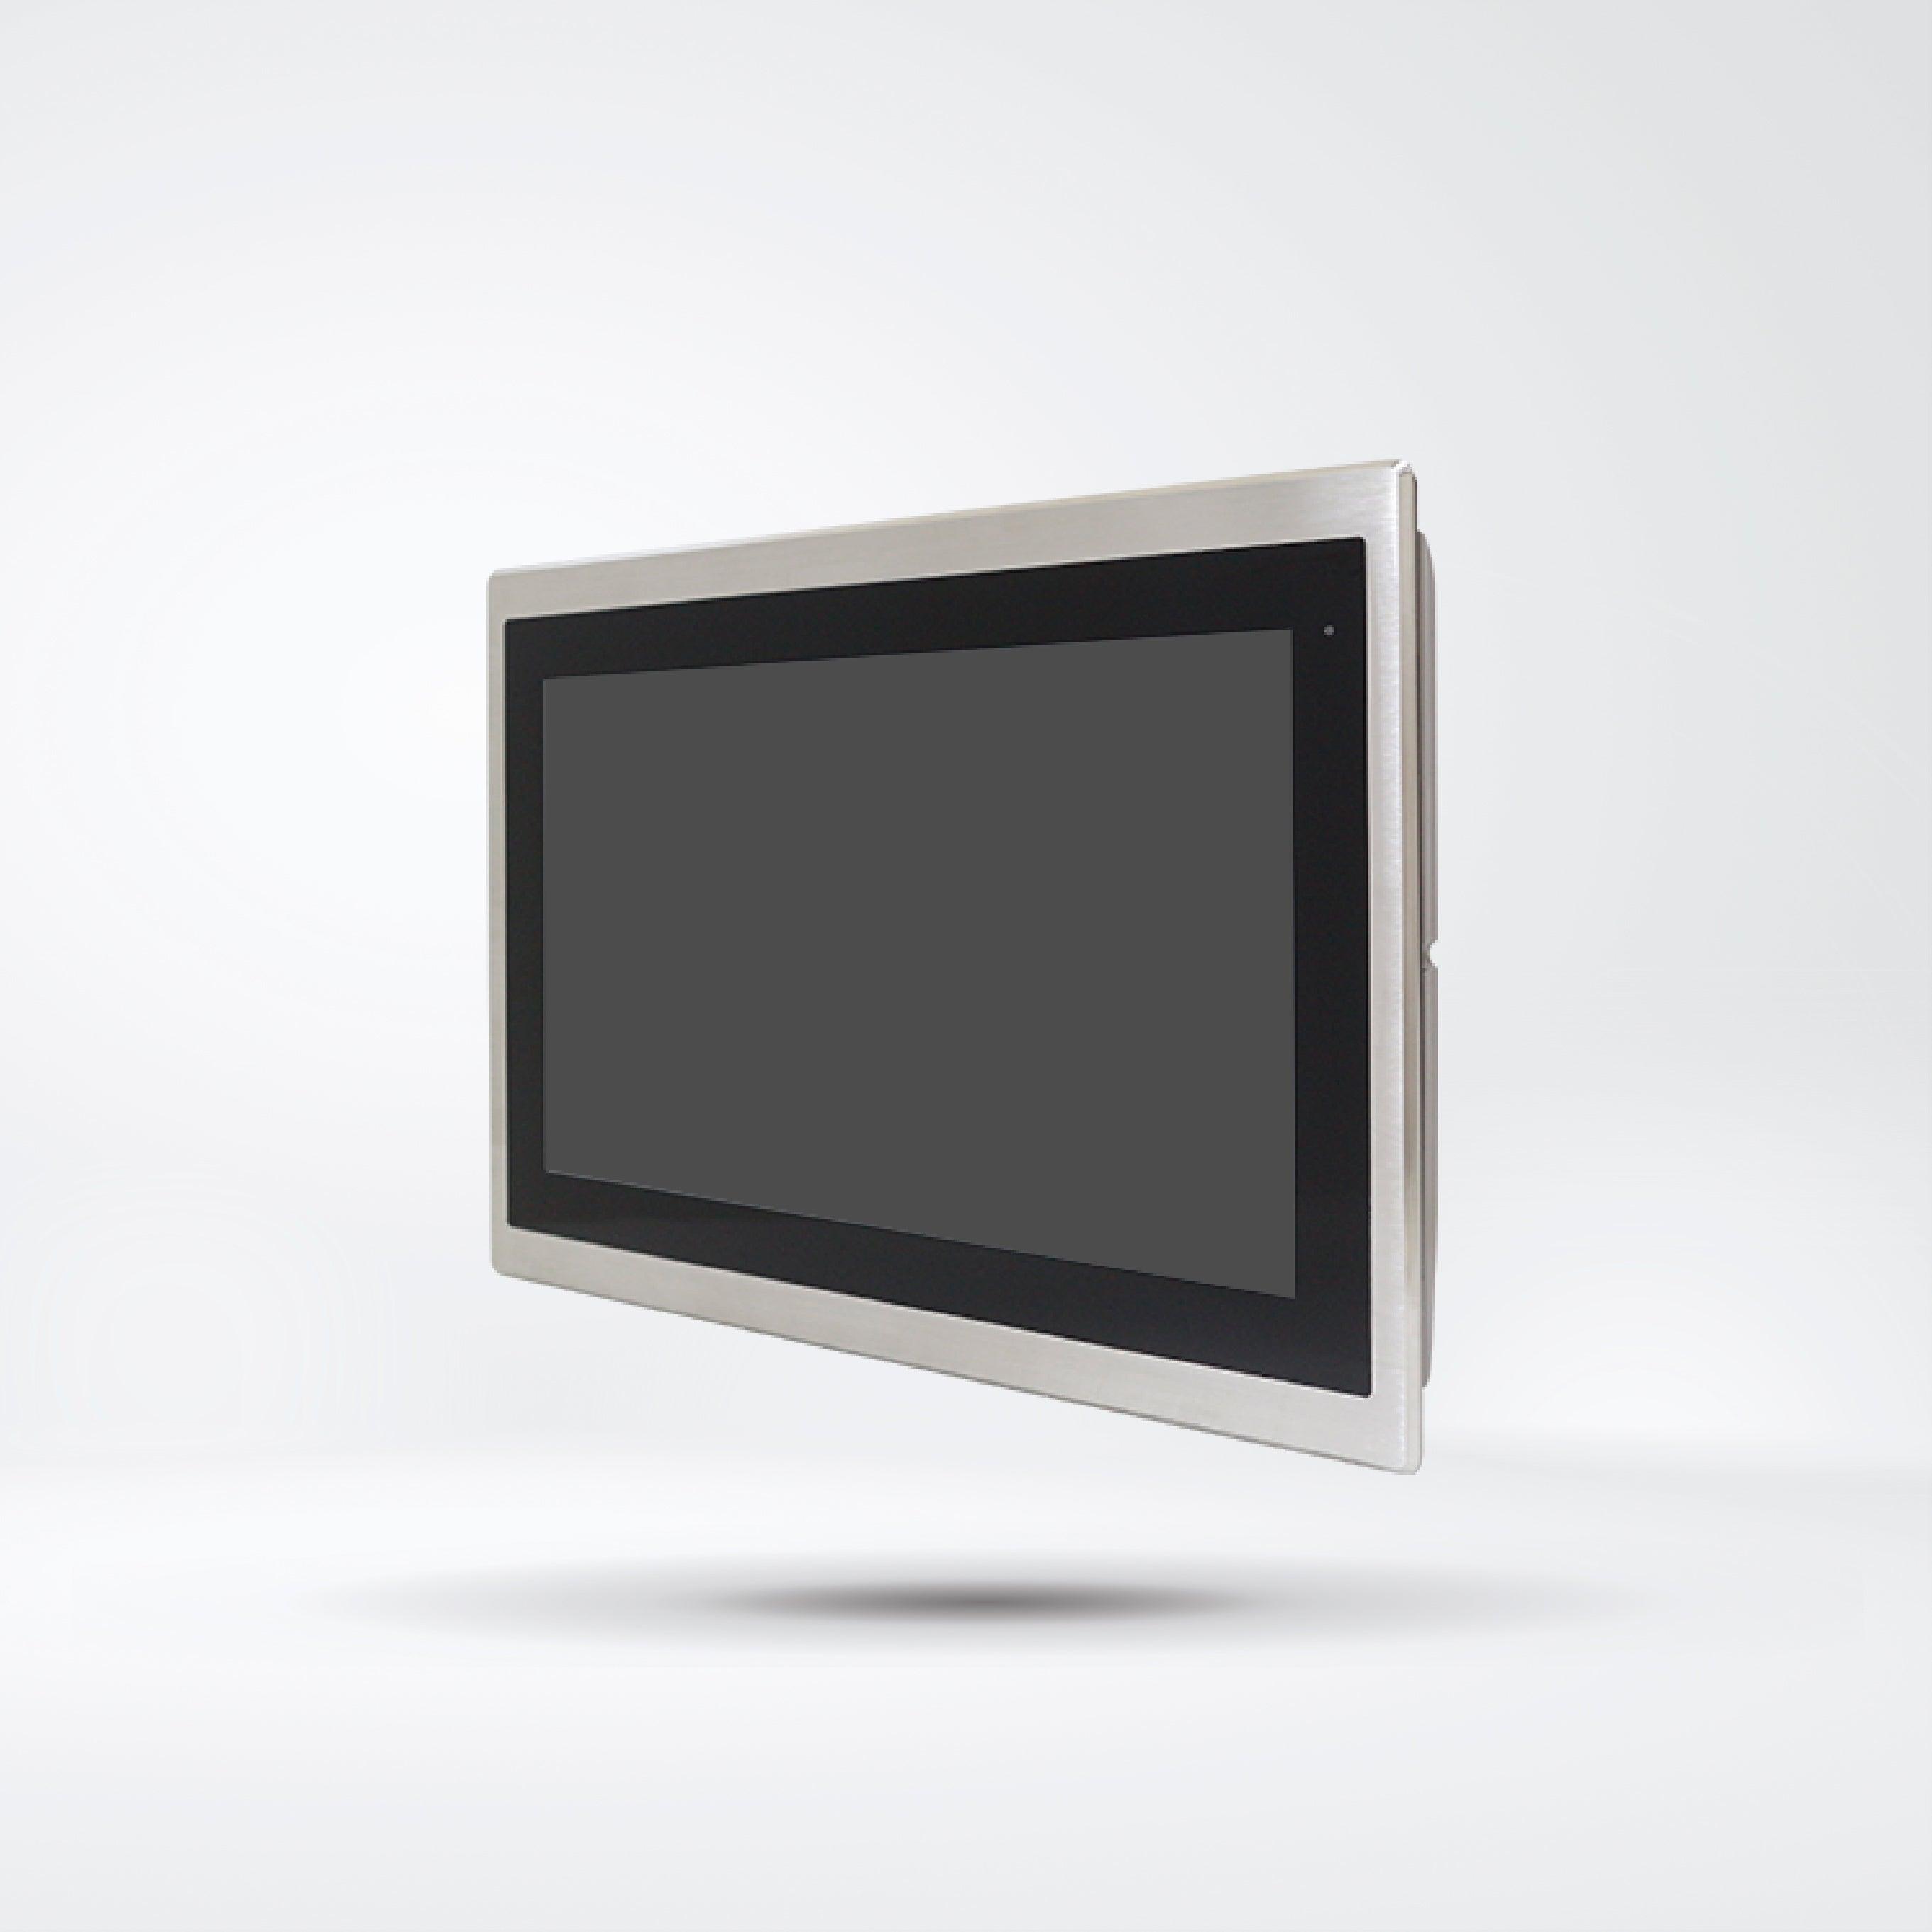 FABS-116R 15.6” Flat Front Panel IP66 Stainless Chassis Display - Riverplus